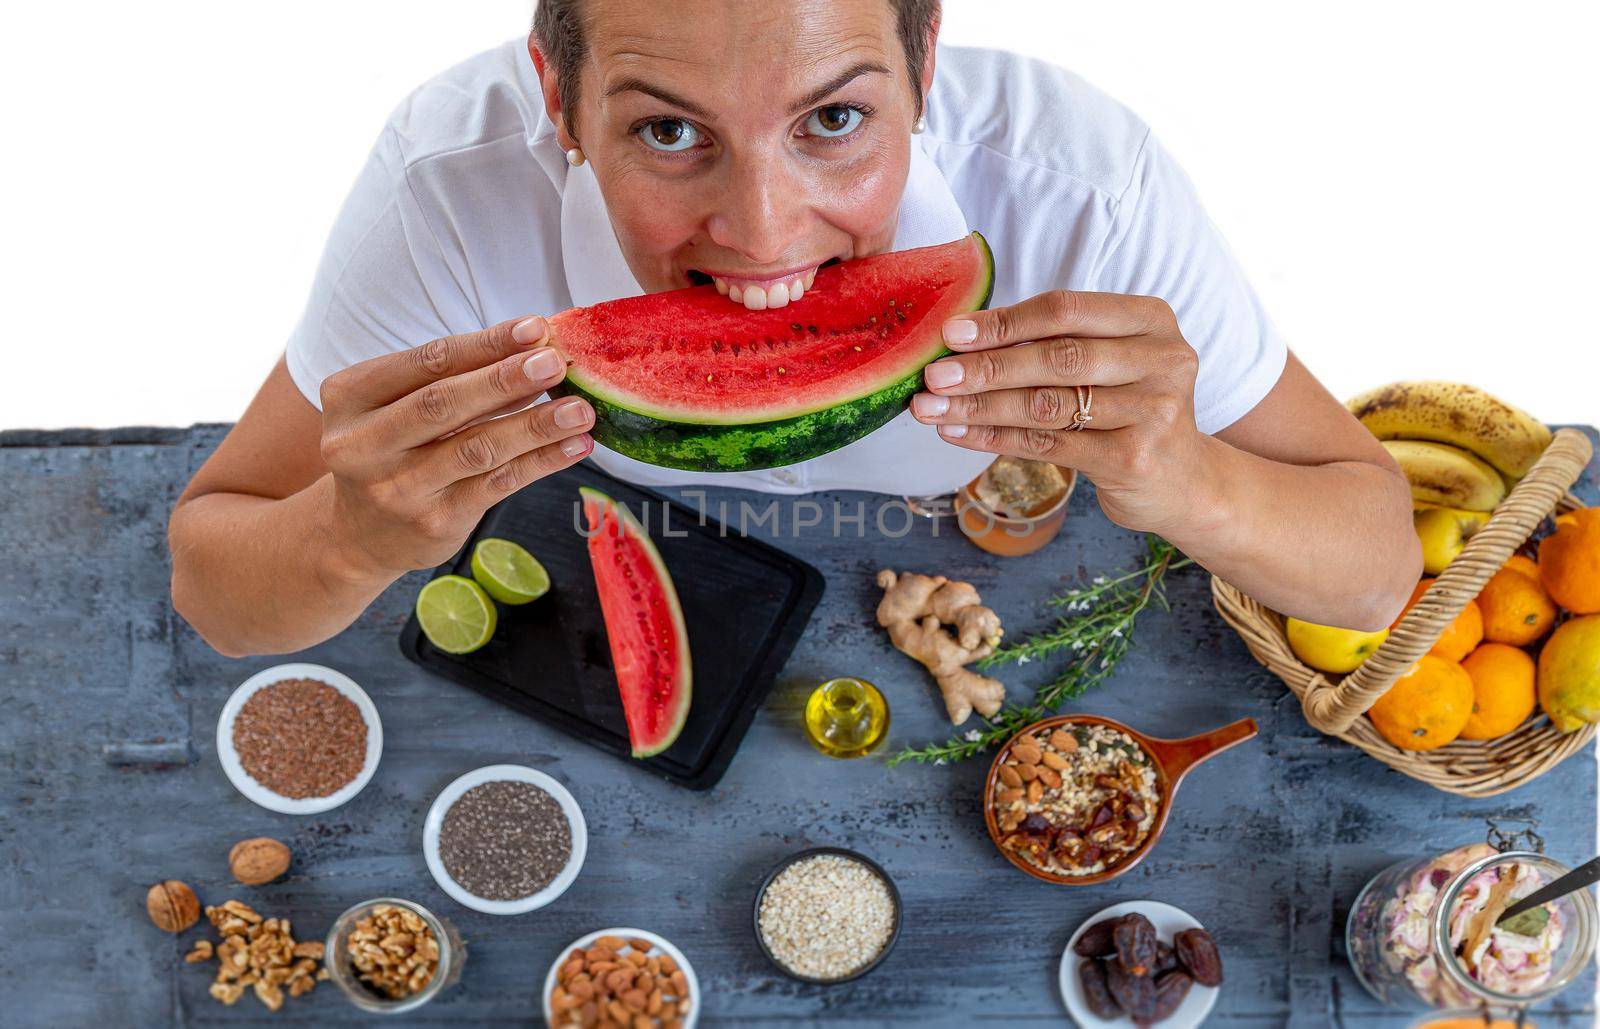 Woman crunching to the teeth watermelon surrounded by cereals, seeds, dried fruits, citrus fruits, ginger and others.